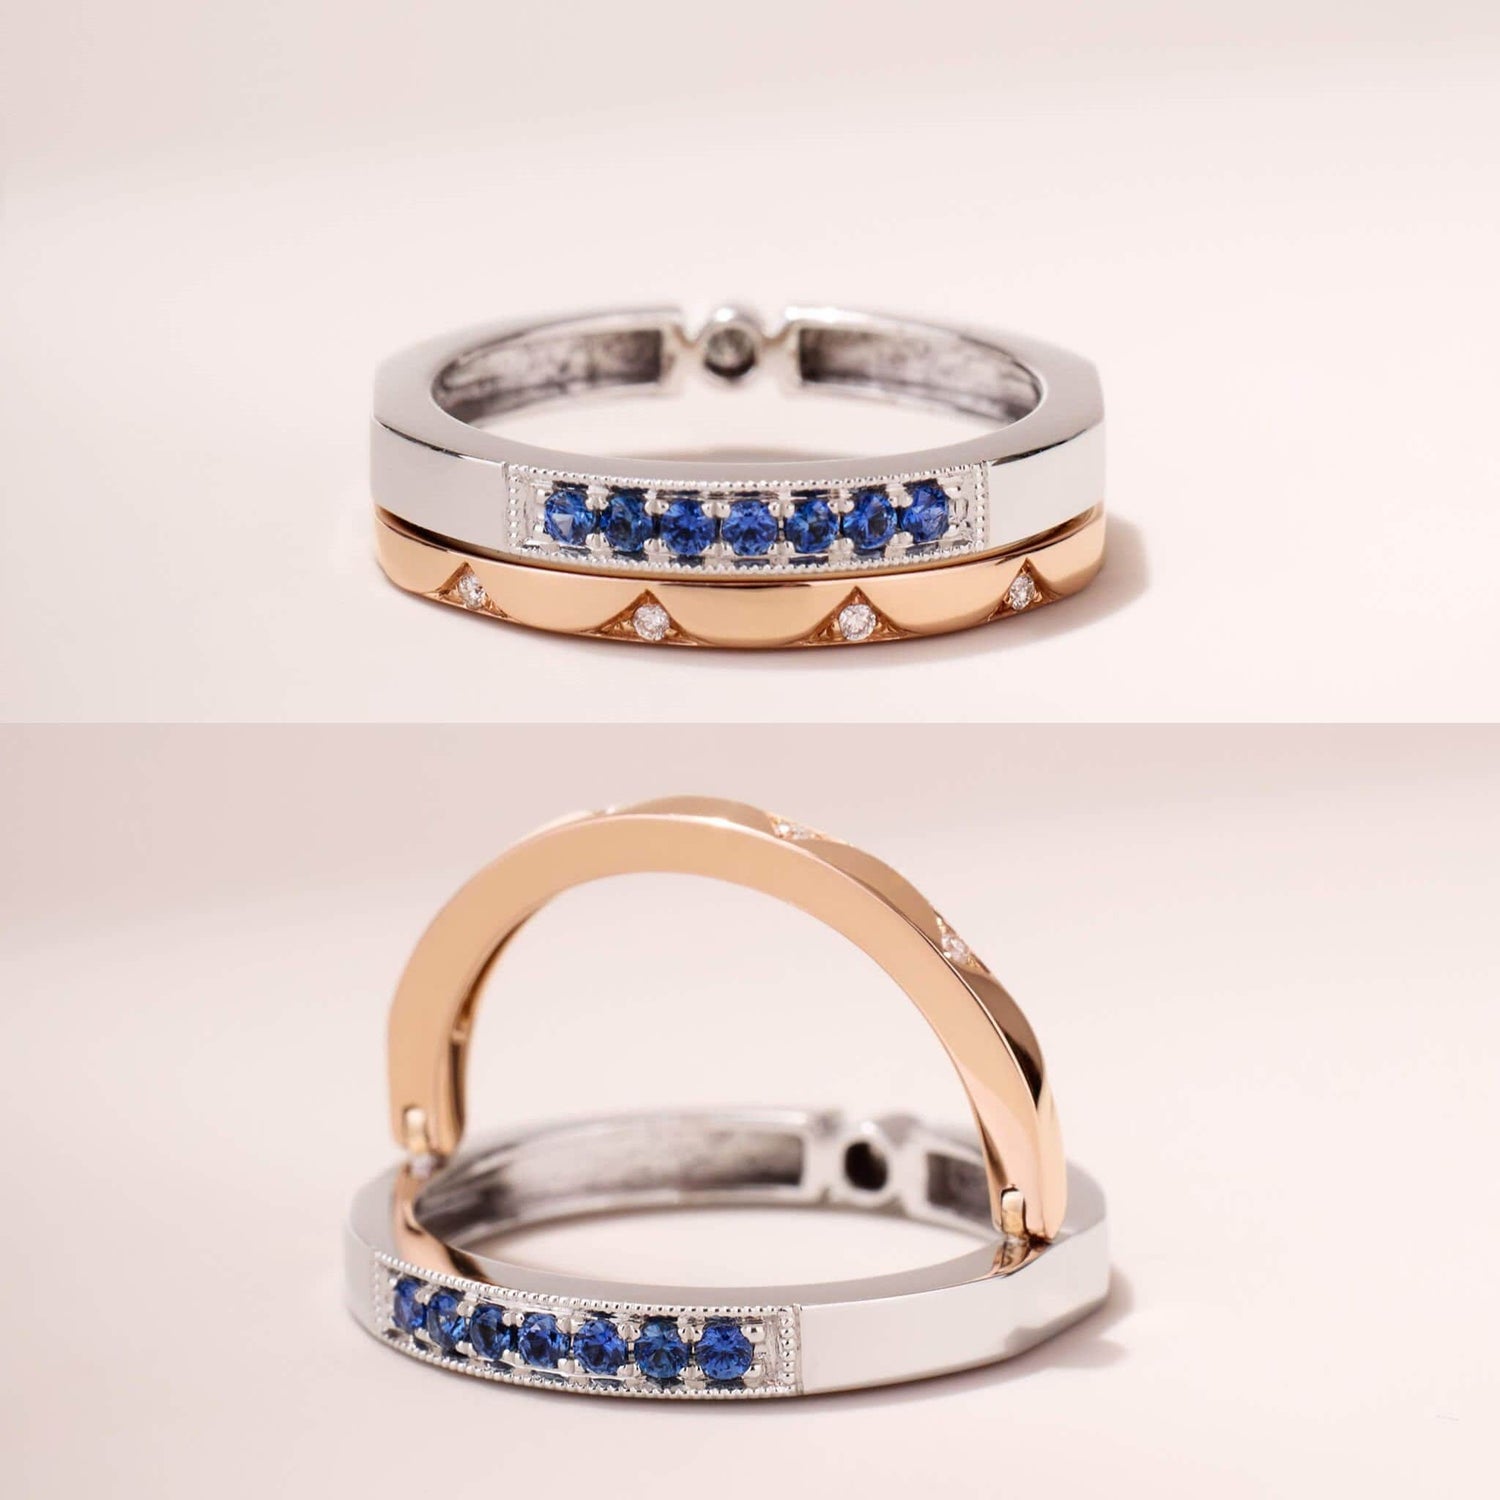 One-Flip Diamond and Sapphire Ring（1 Rings with 4 Styles)